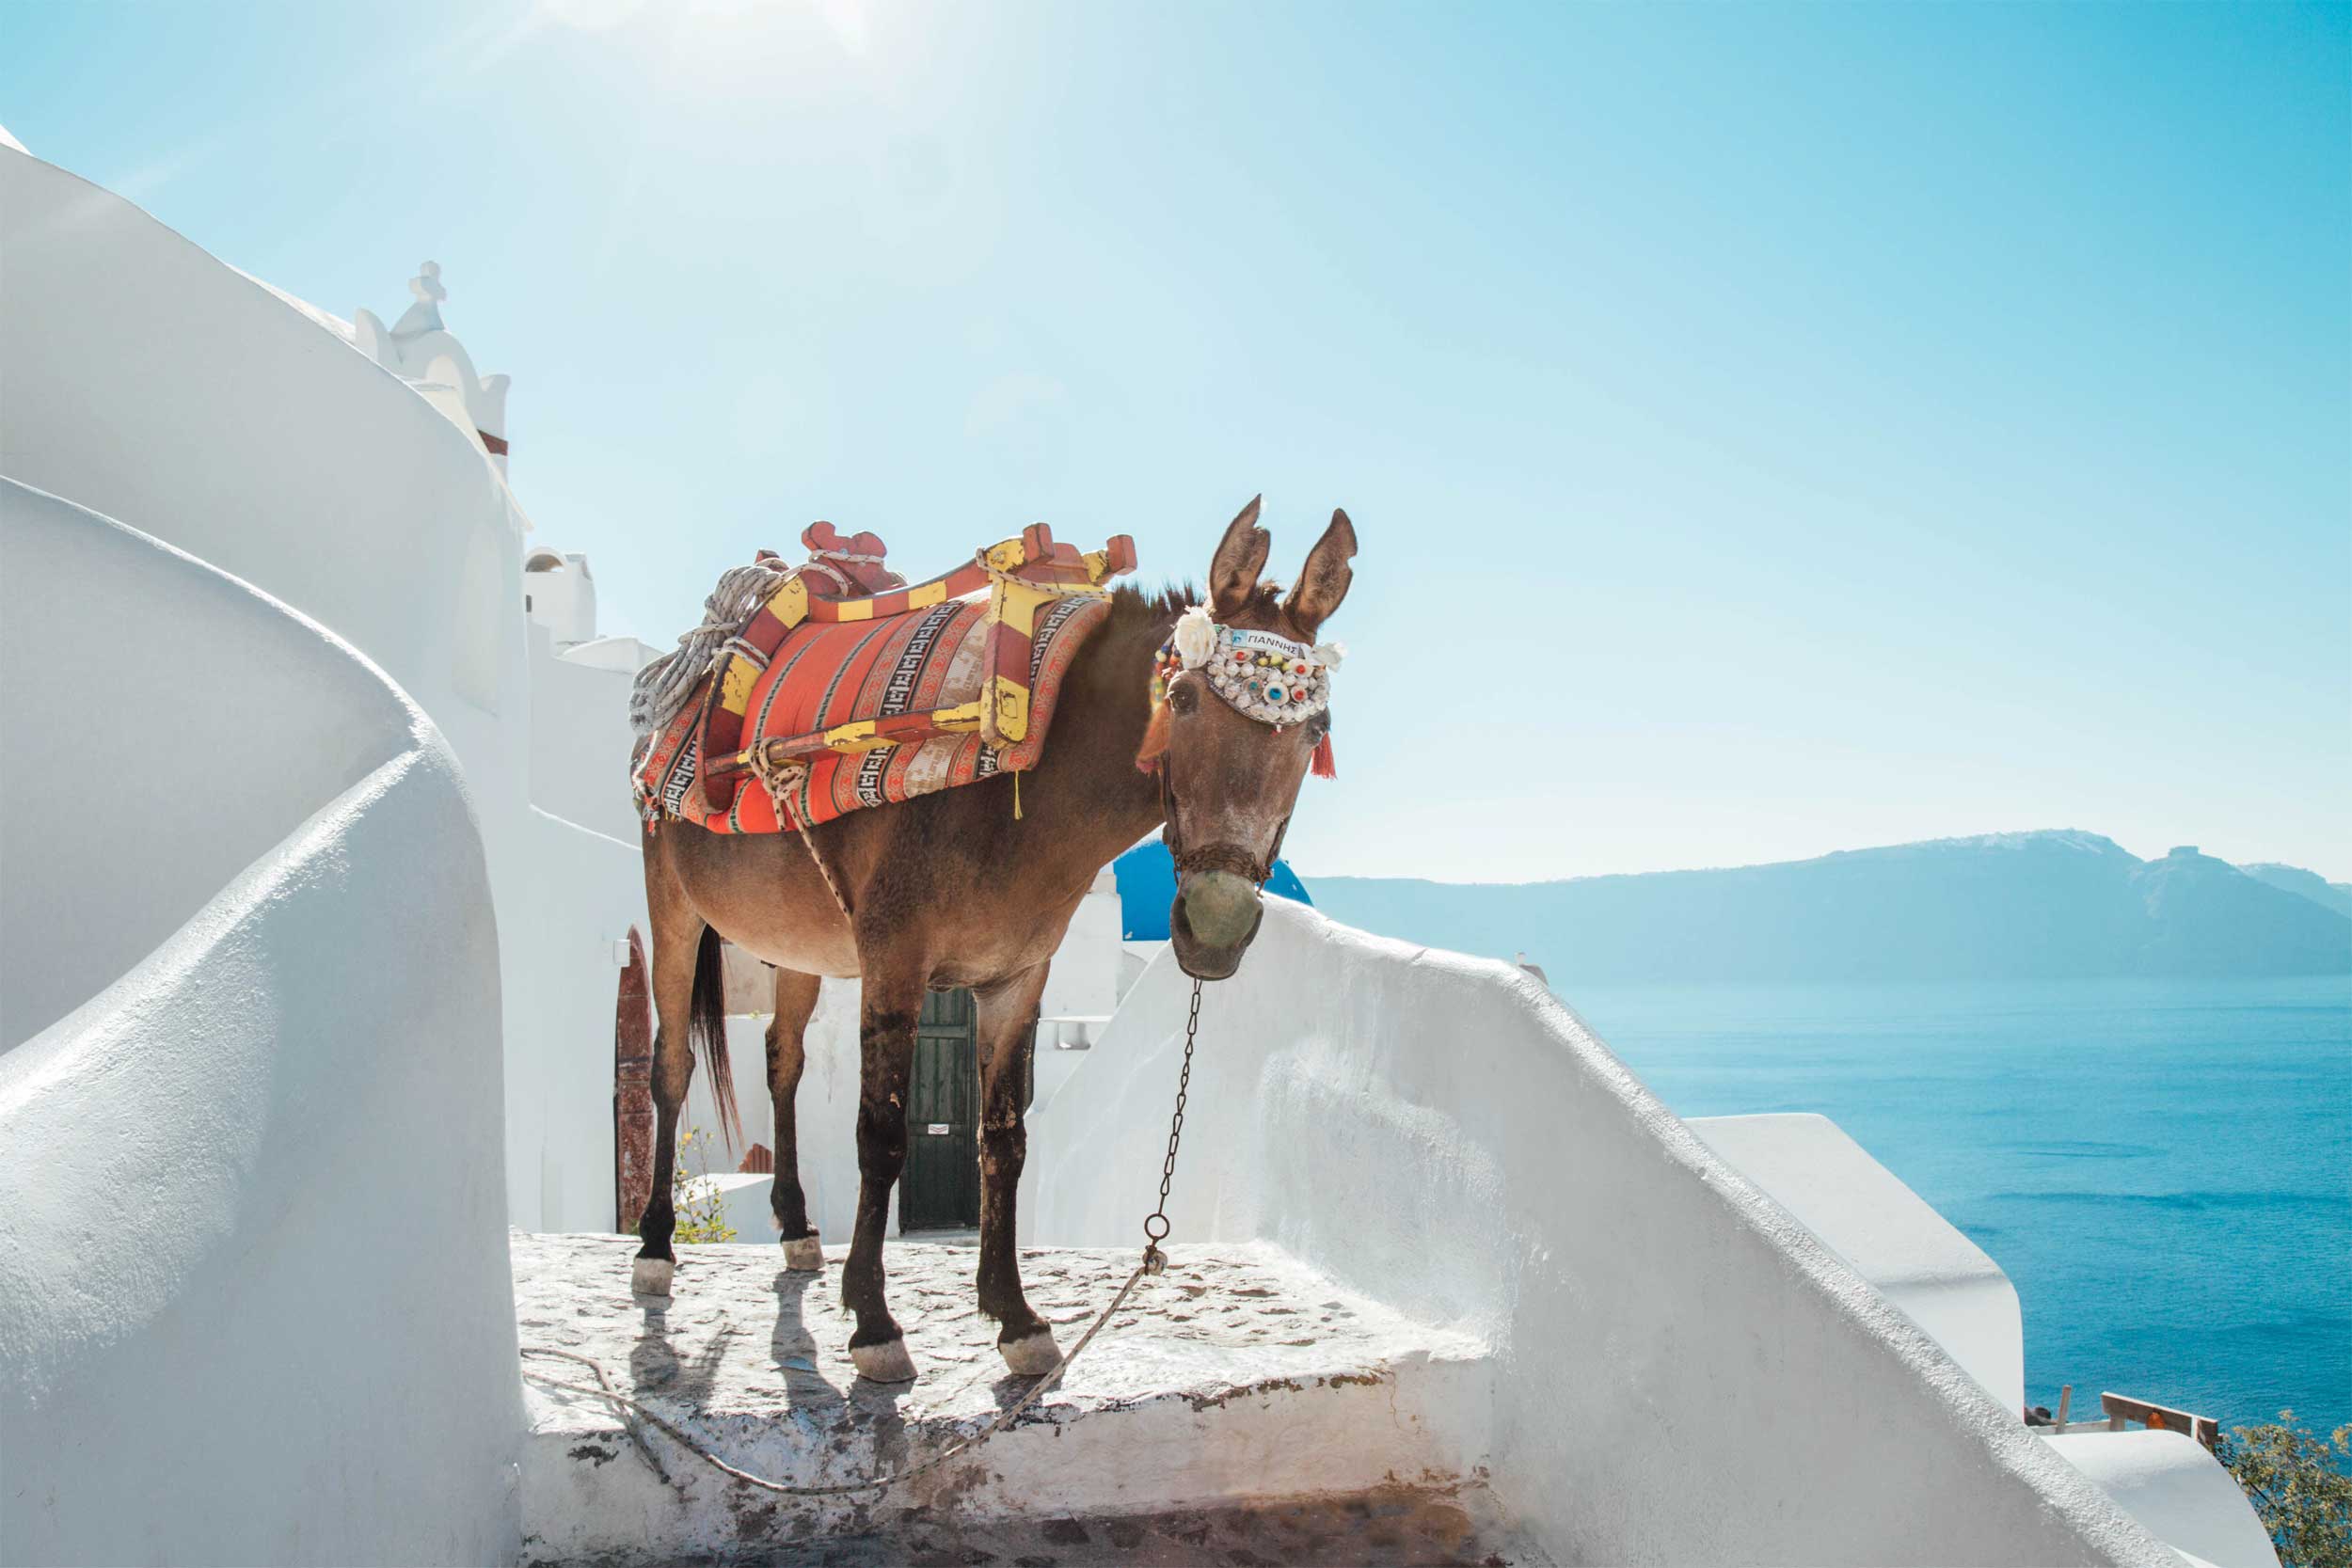 A donkey with a colourful saddle standing on whitewash-walled steps and peering at photographer, Greece